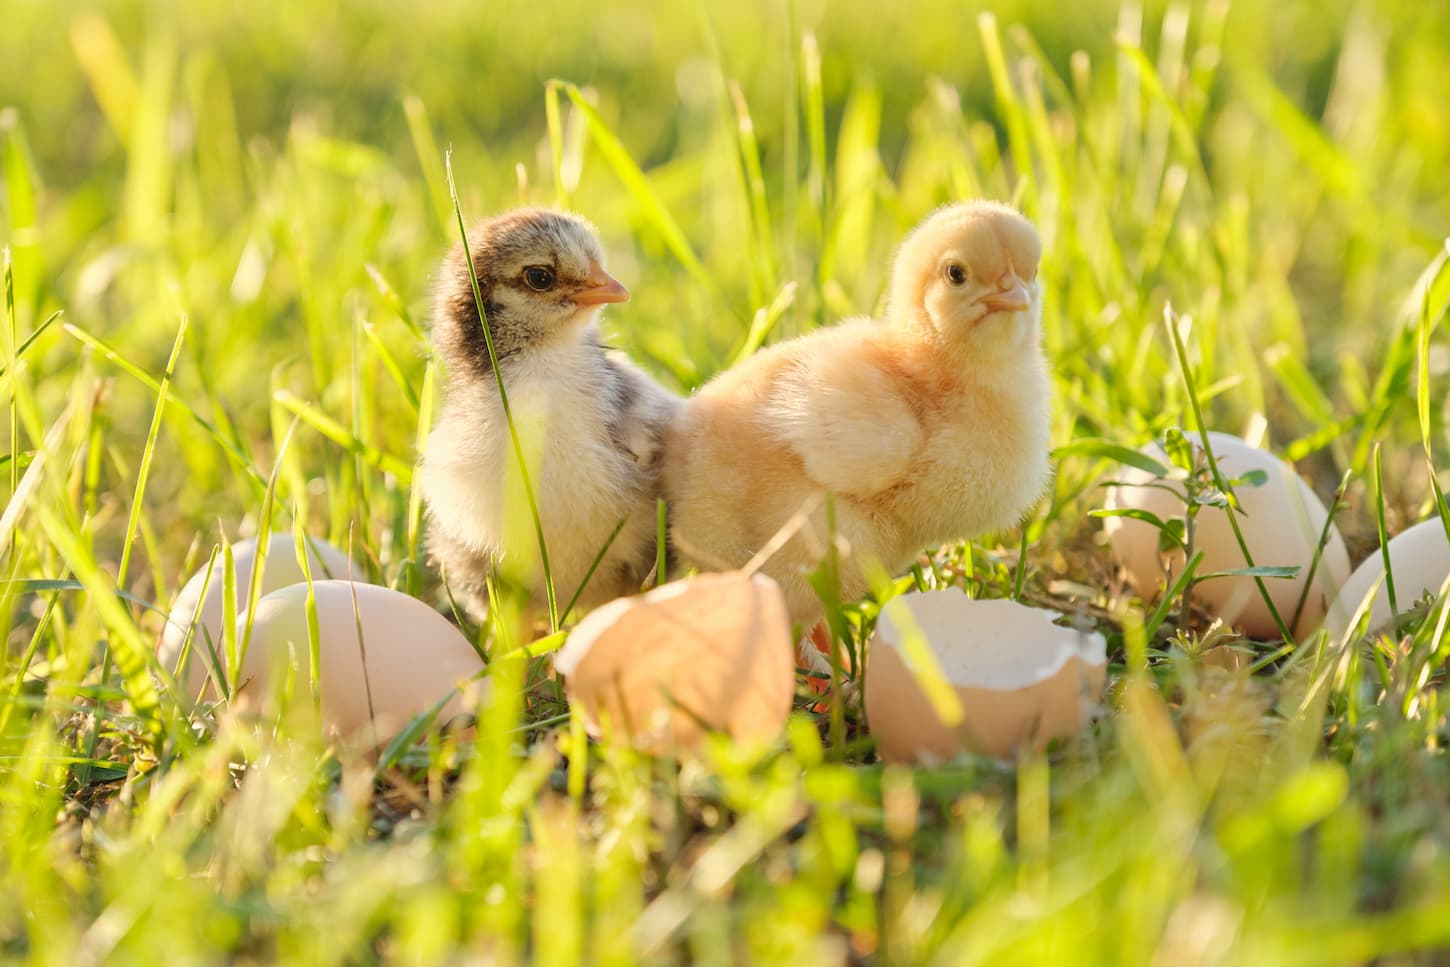 An image of Two newborn chicks with cracked eggshell eggs.